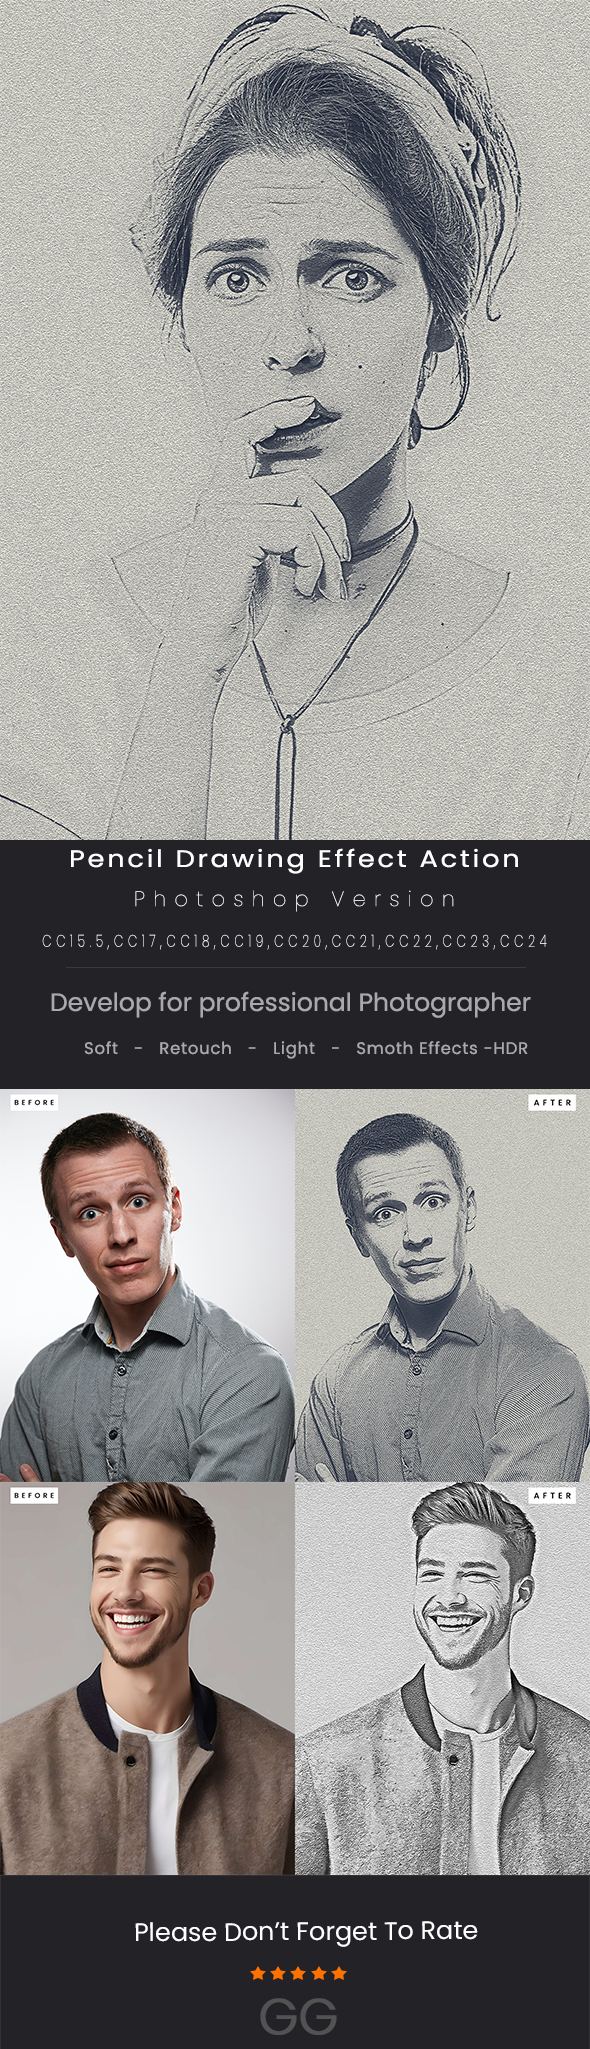 Pencil Drawing Effect Action